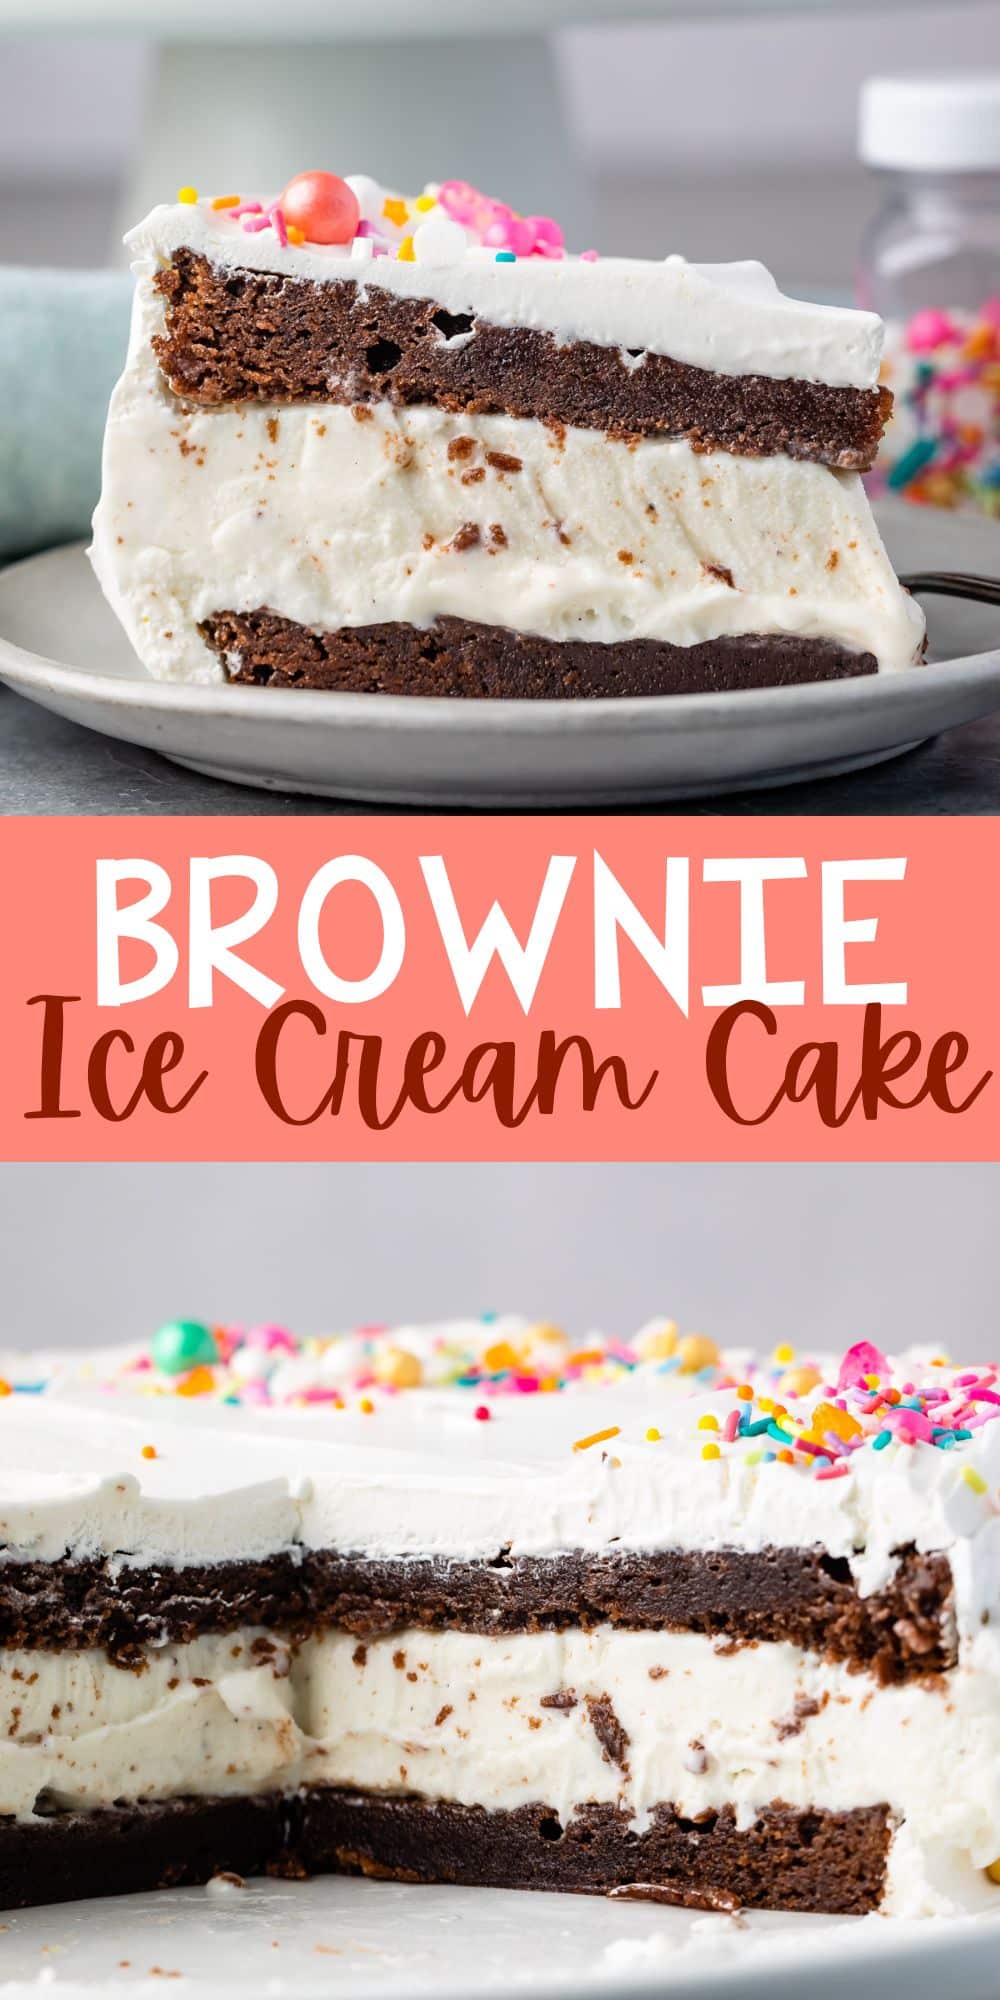 two photos of brownie cake layered with ice cream and frosting and topped with sprinkles with words on the image.